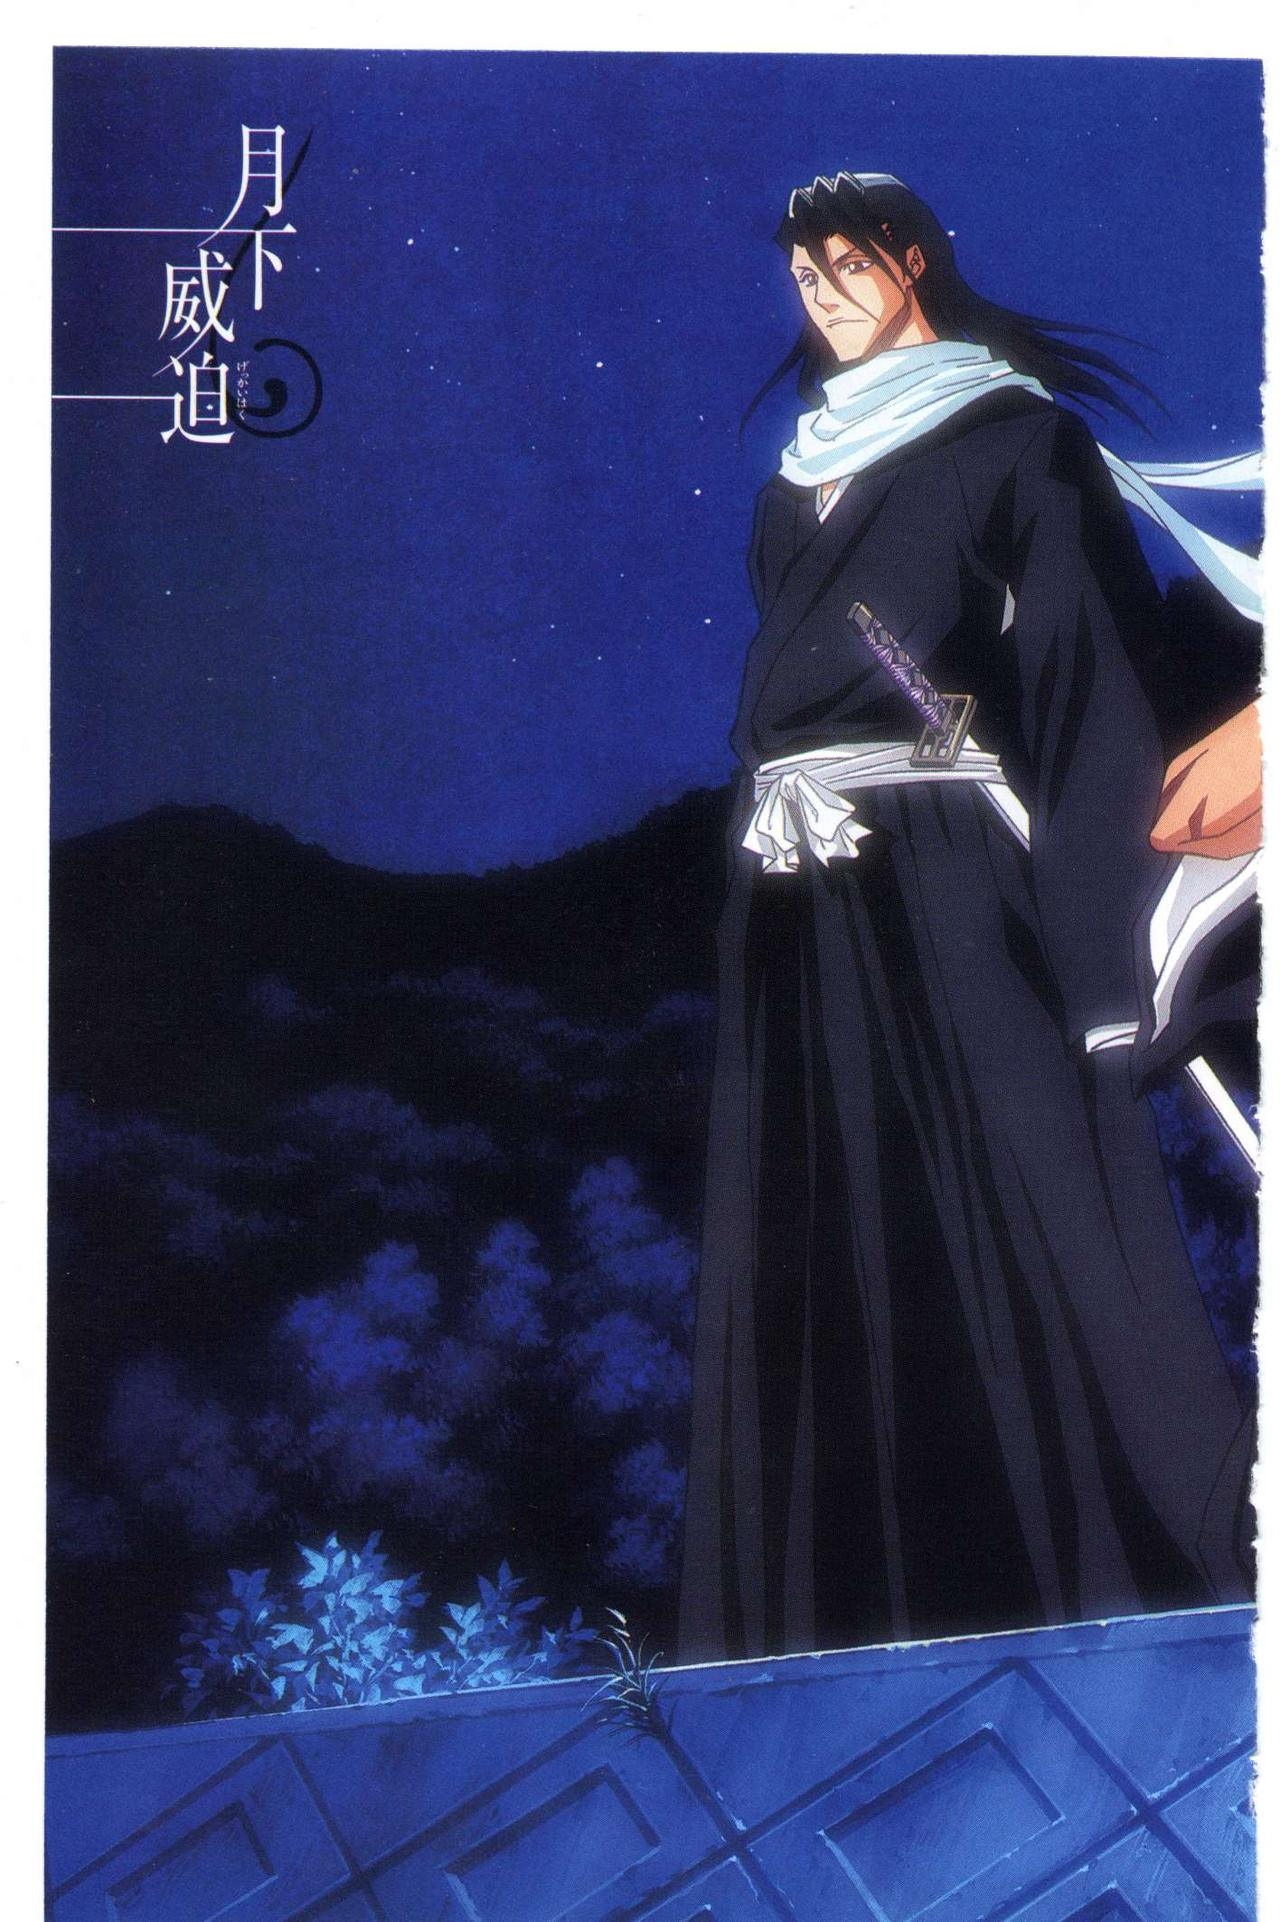 Bleach: Official Animation Book VIBEs 57